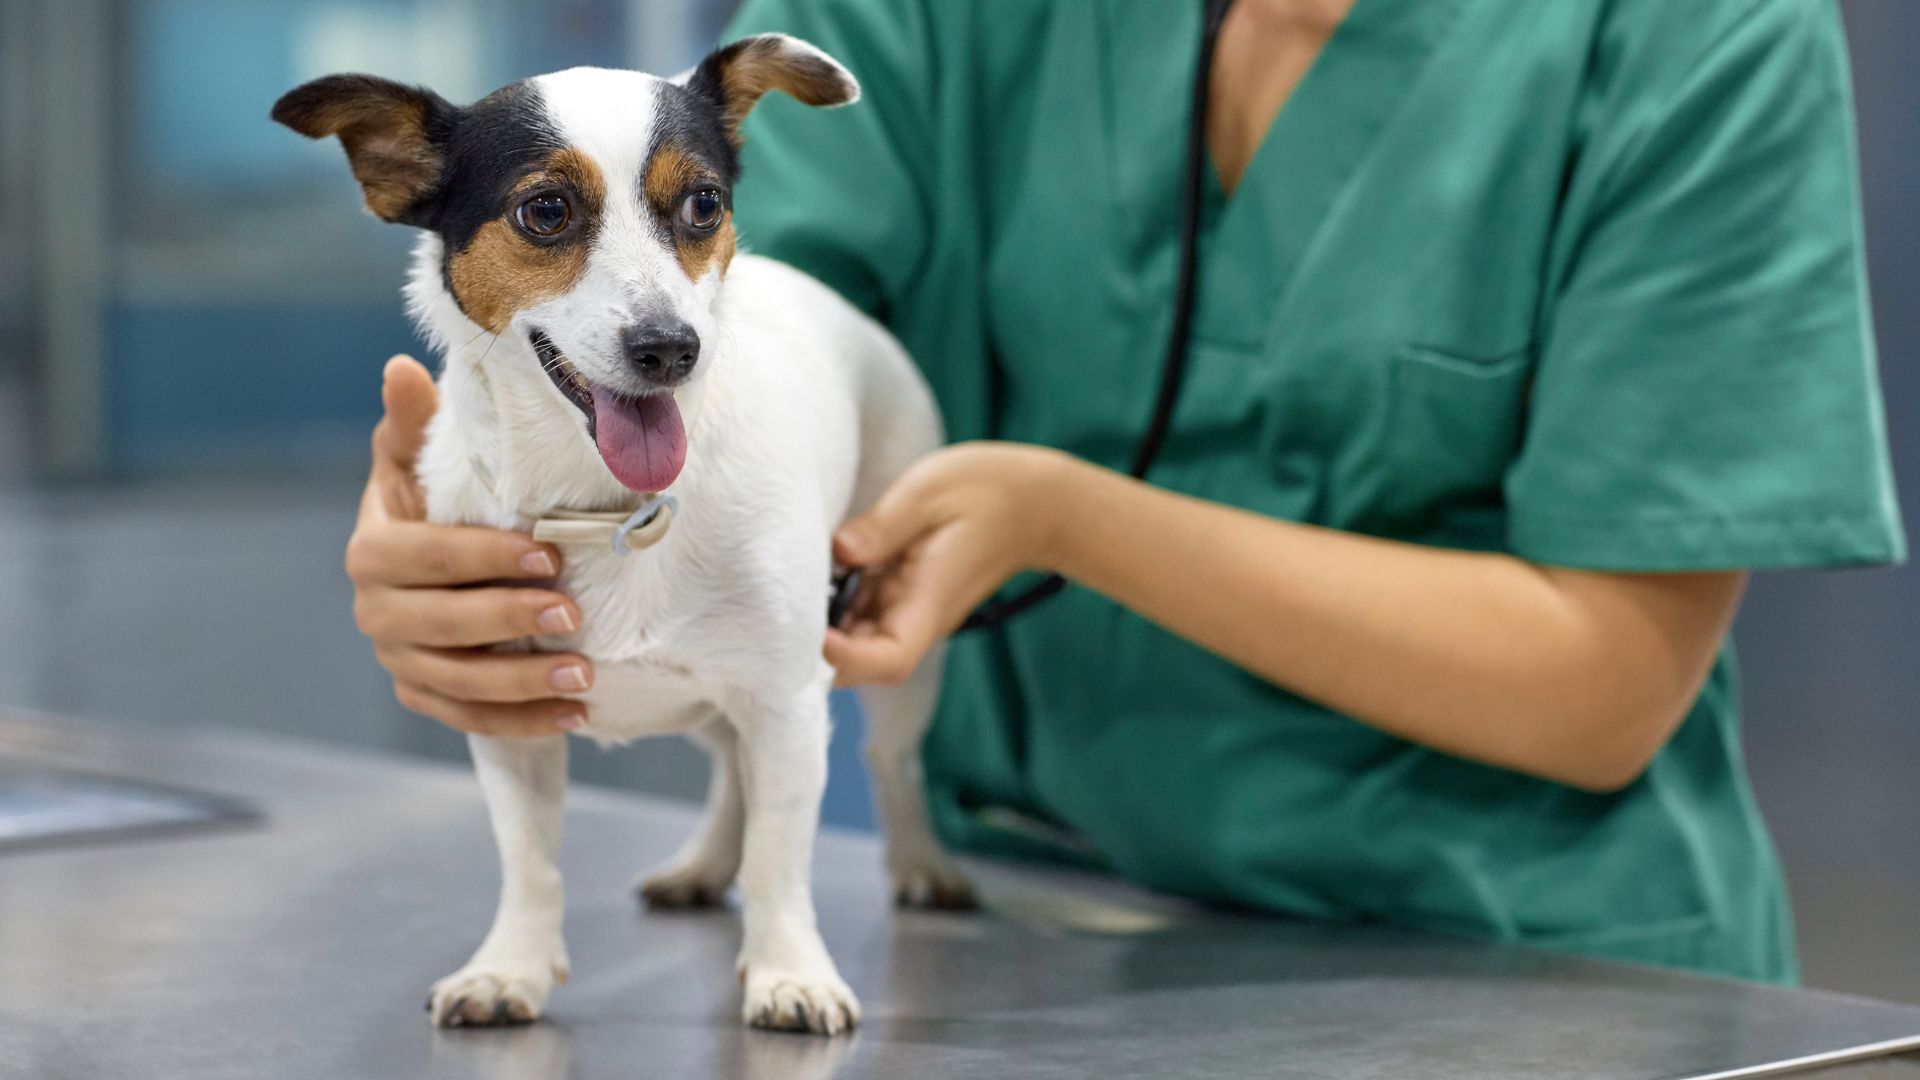 veterinarian examining dog with stethoscope in clinic